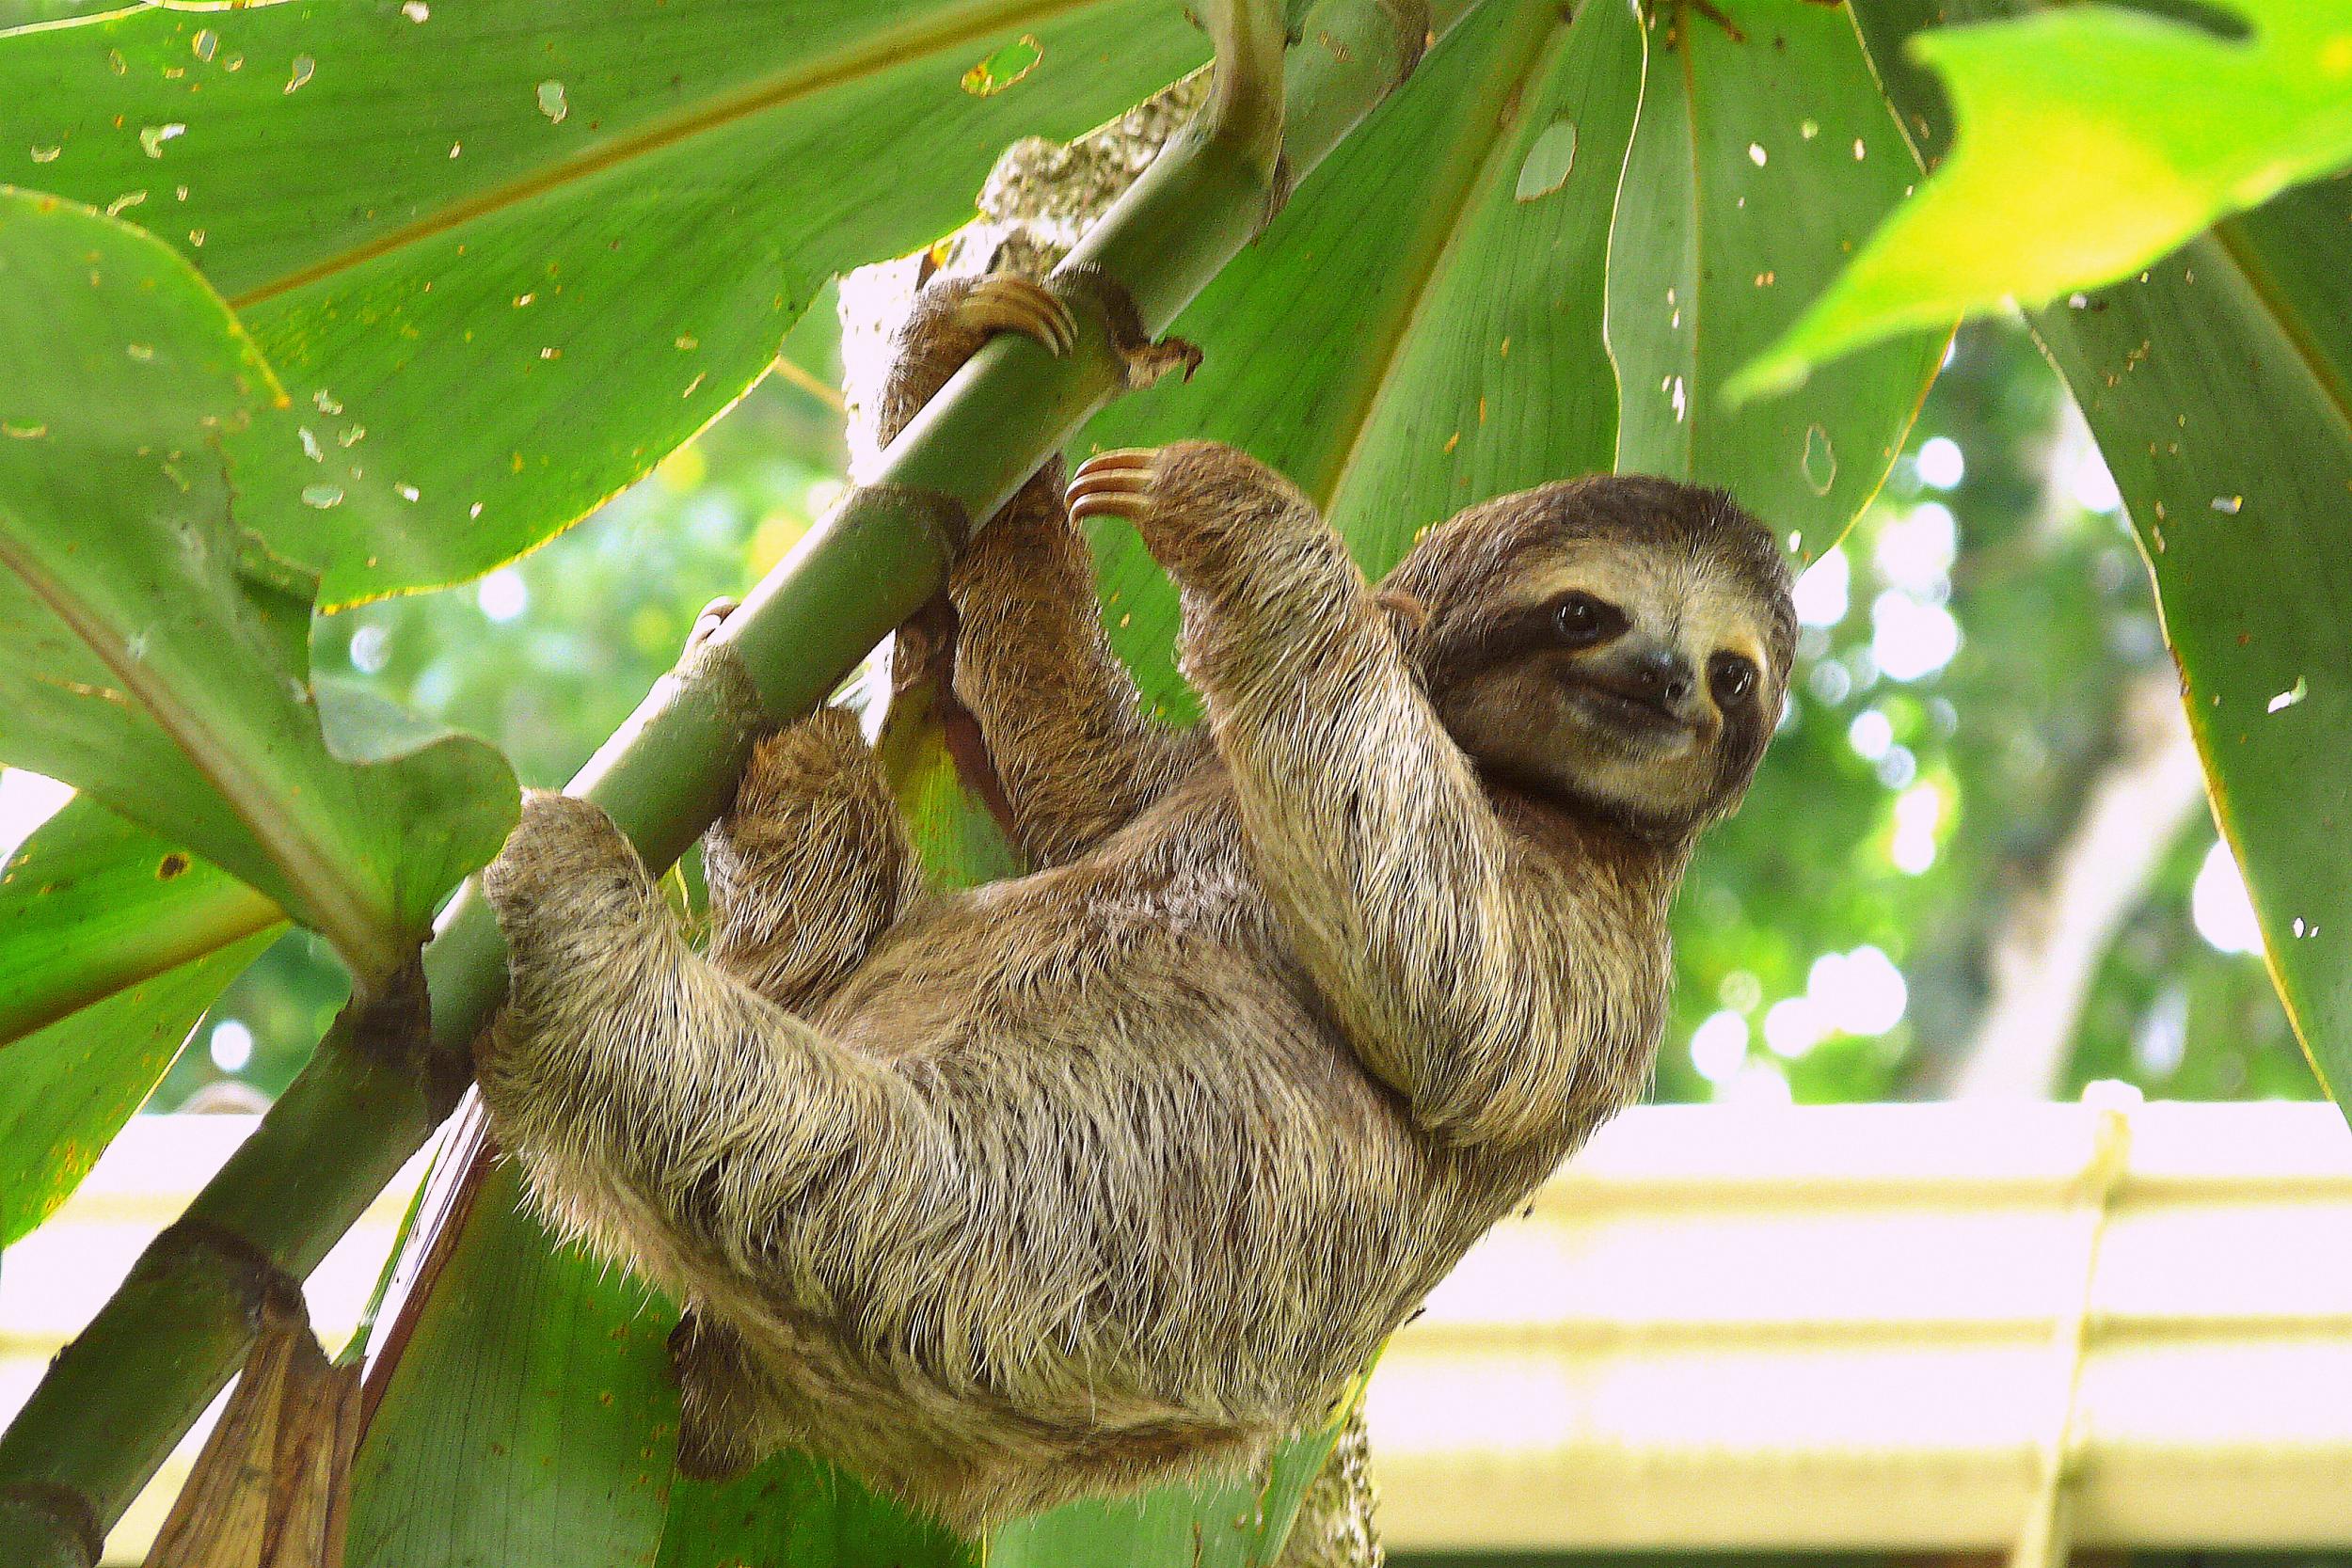 A smiling sloth (iStock)